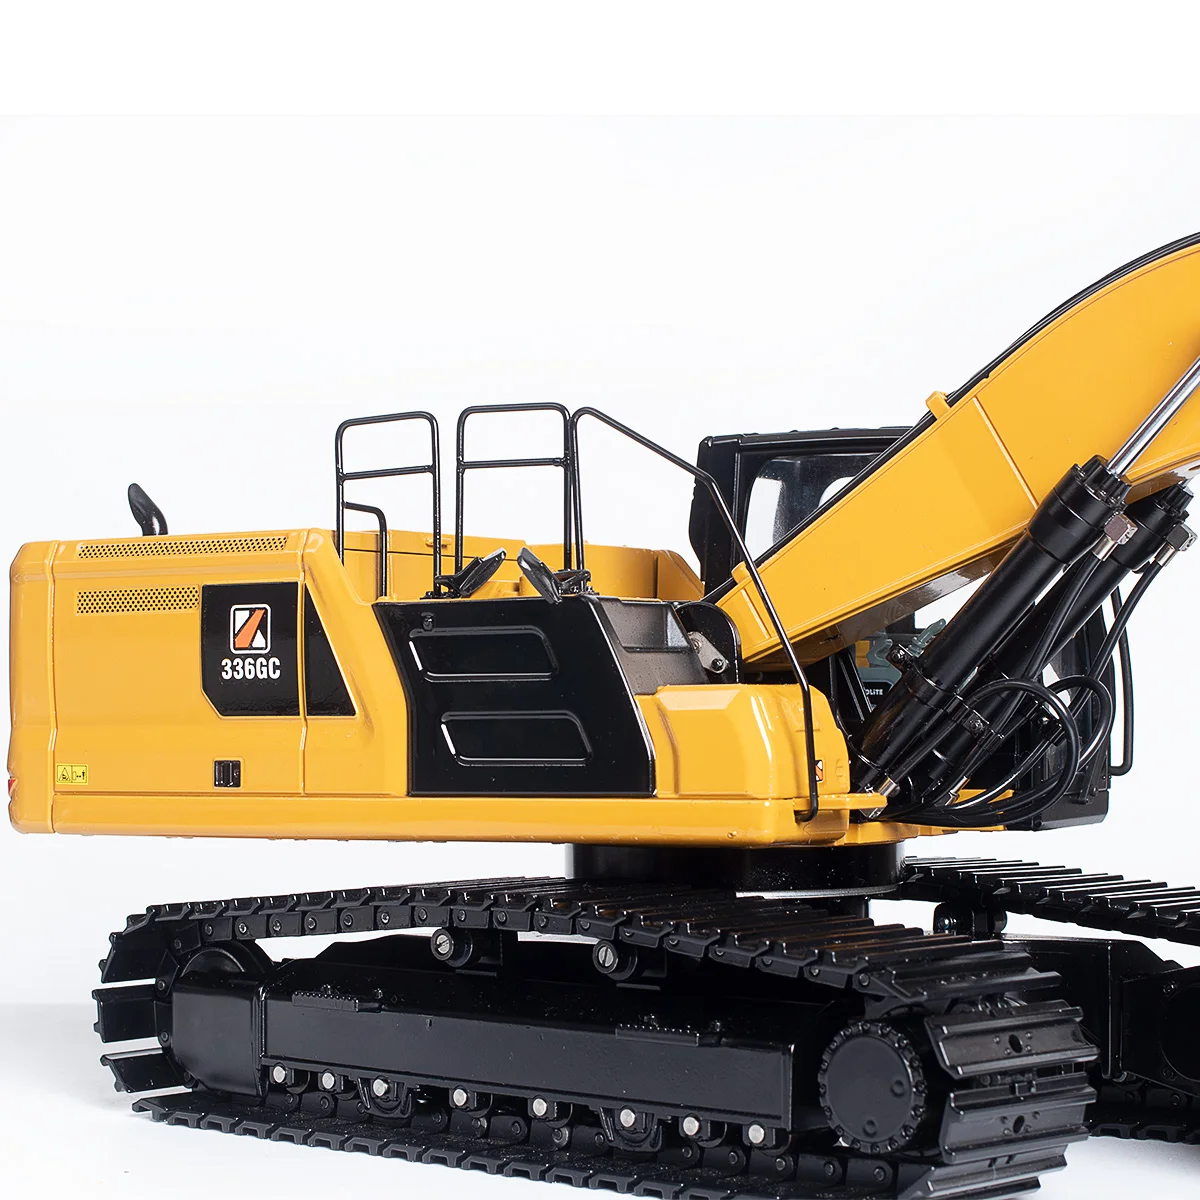 1/16 scale  KABOLiTE 336GC Hydraulic powered RC Excavator professional level toy(no hydraulic oil INCLUDED) //+8613262269363